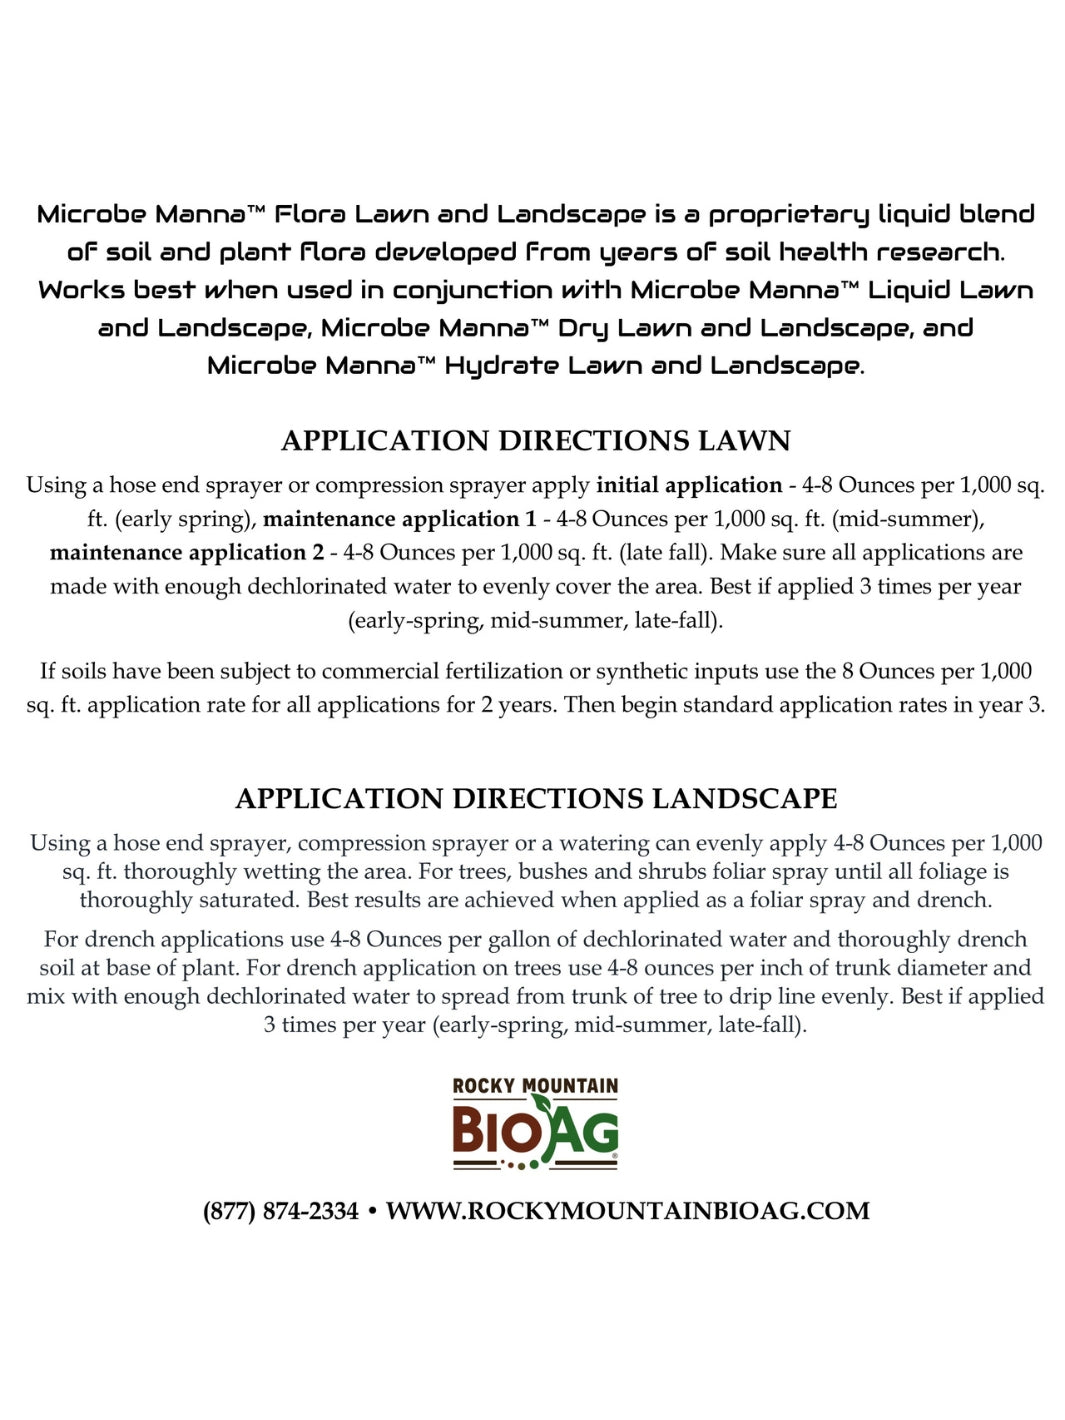 Microbe Manna Flora Lawn and Landscape Soil Nutrition Blend Directions